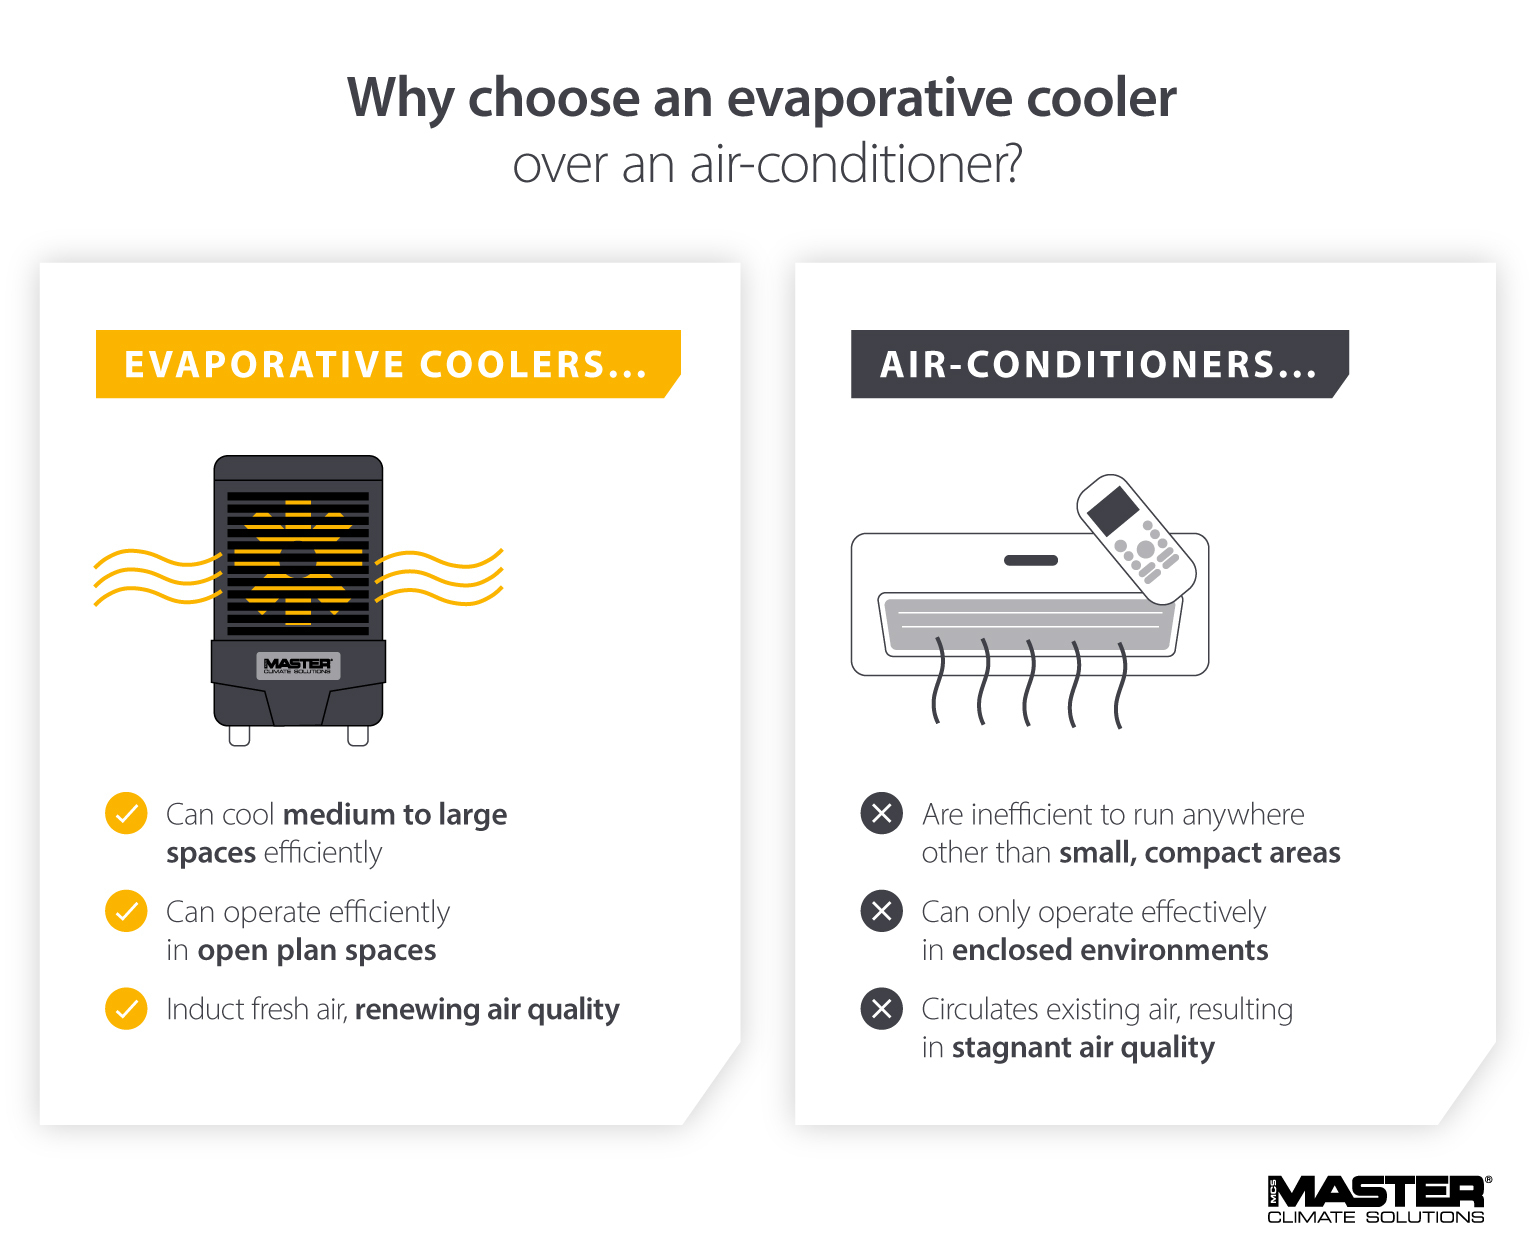 Comparing benefits and why to choose evaporative coolers vs air conditioning - Image and infographic